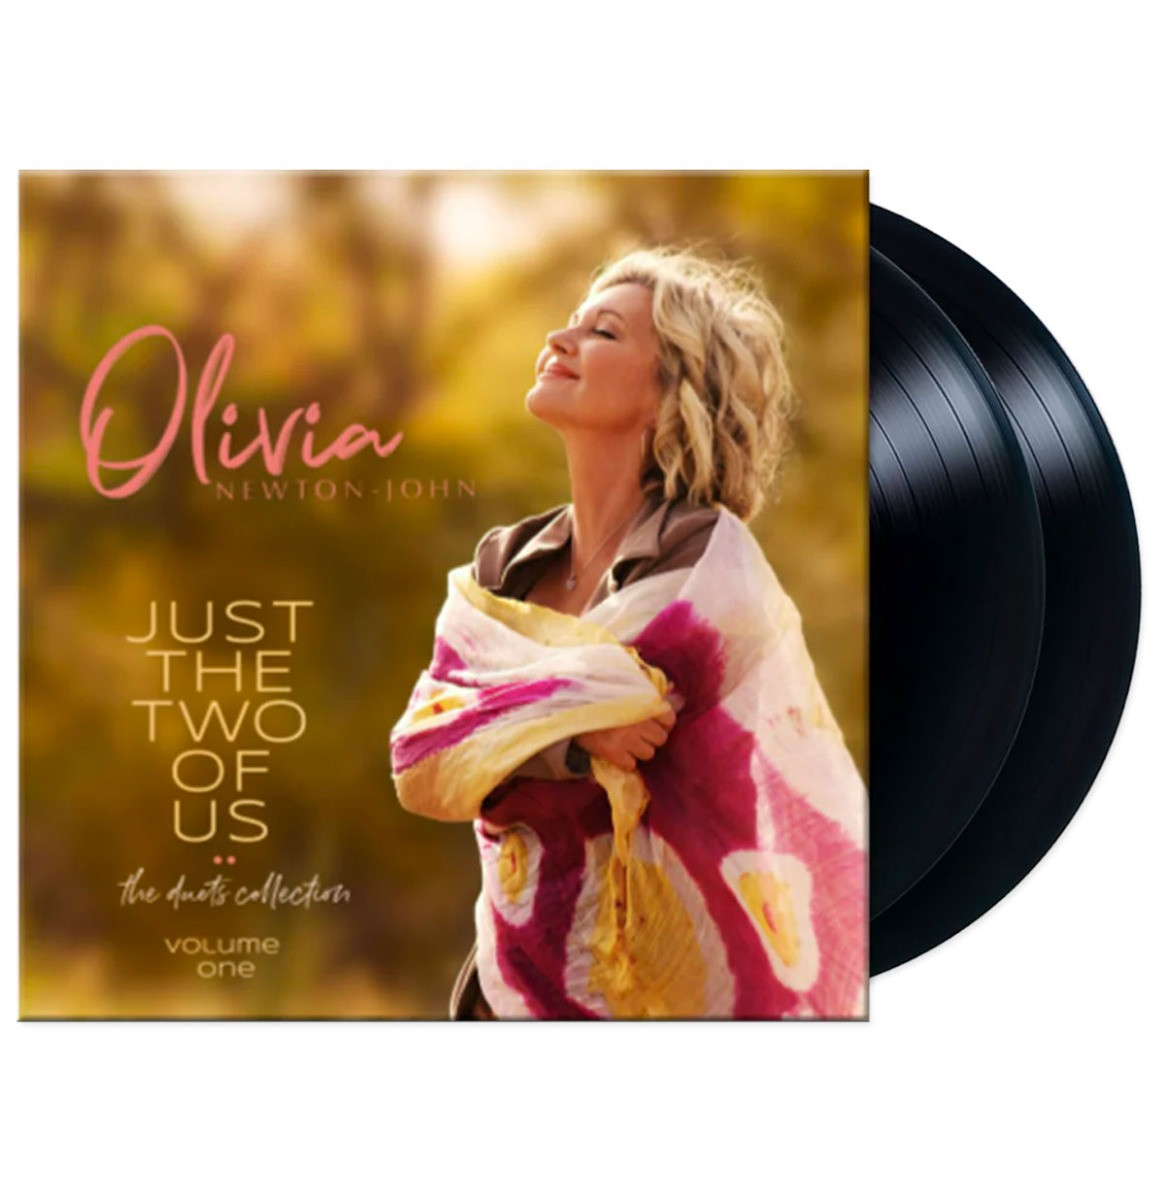 Olivia Newton-John - Just The Two Of Us: The Duets Collection Volume One 2LP